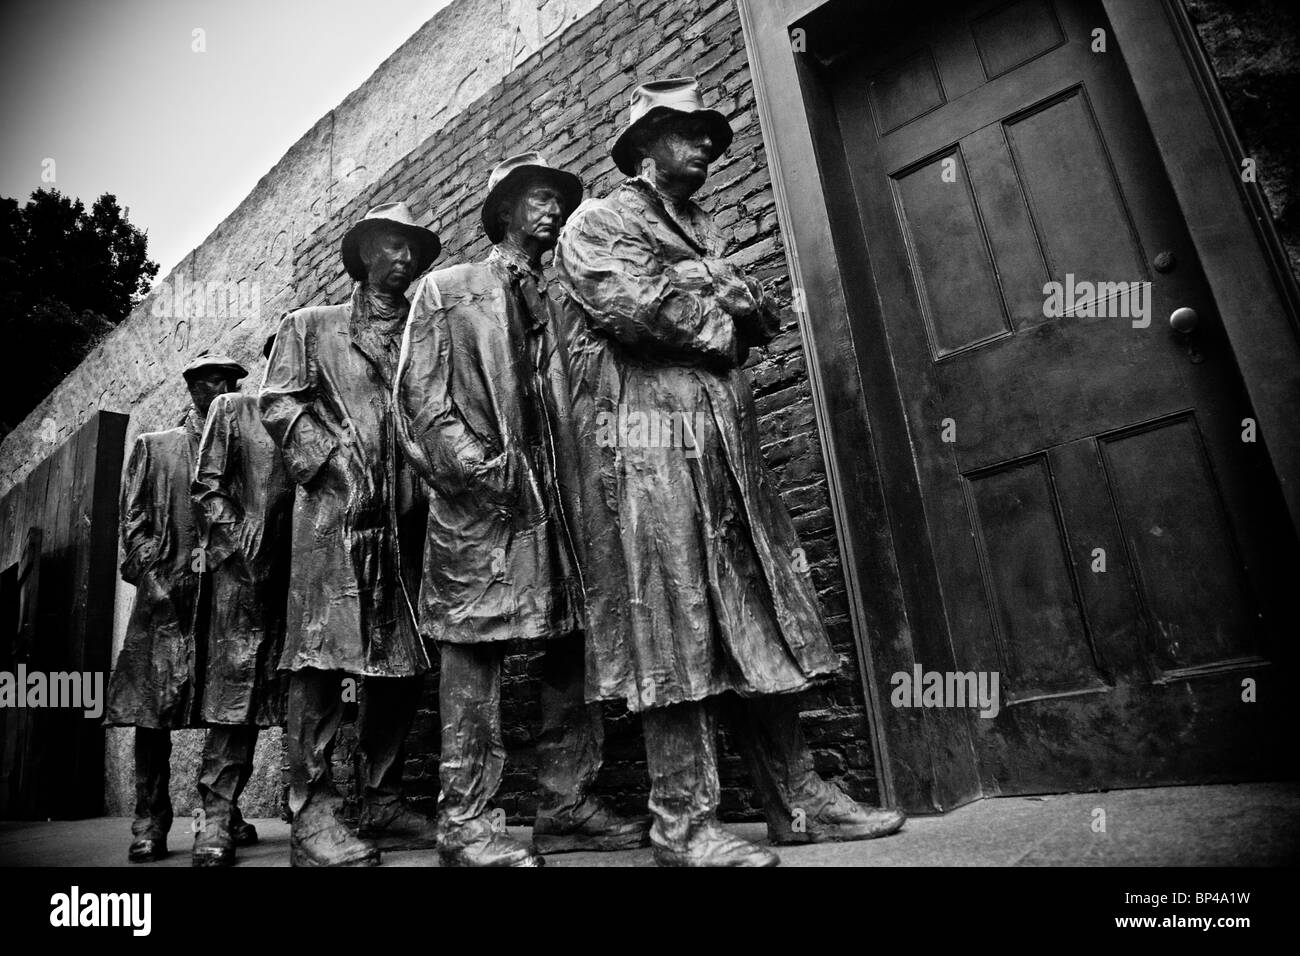 The Franklin Delano Roosevelt (FDR) Memorial in Washington, DC houses a 'room' depicting an urban breadline. Stock Photo